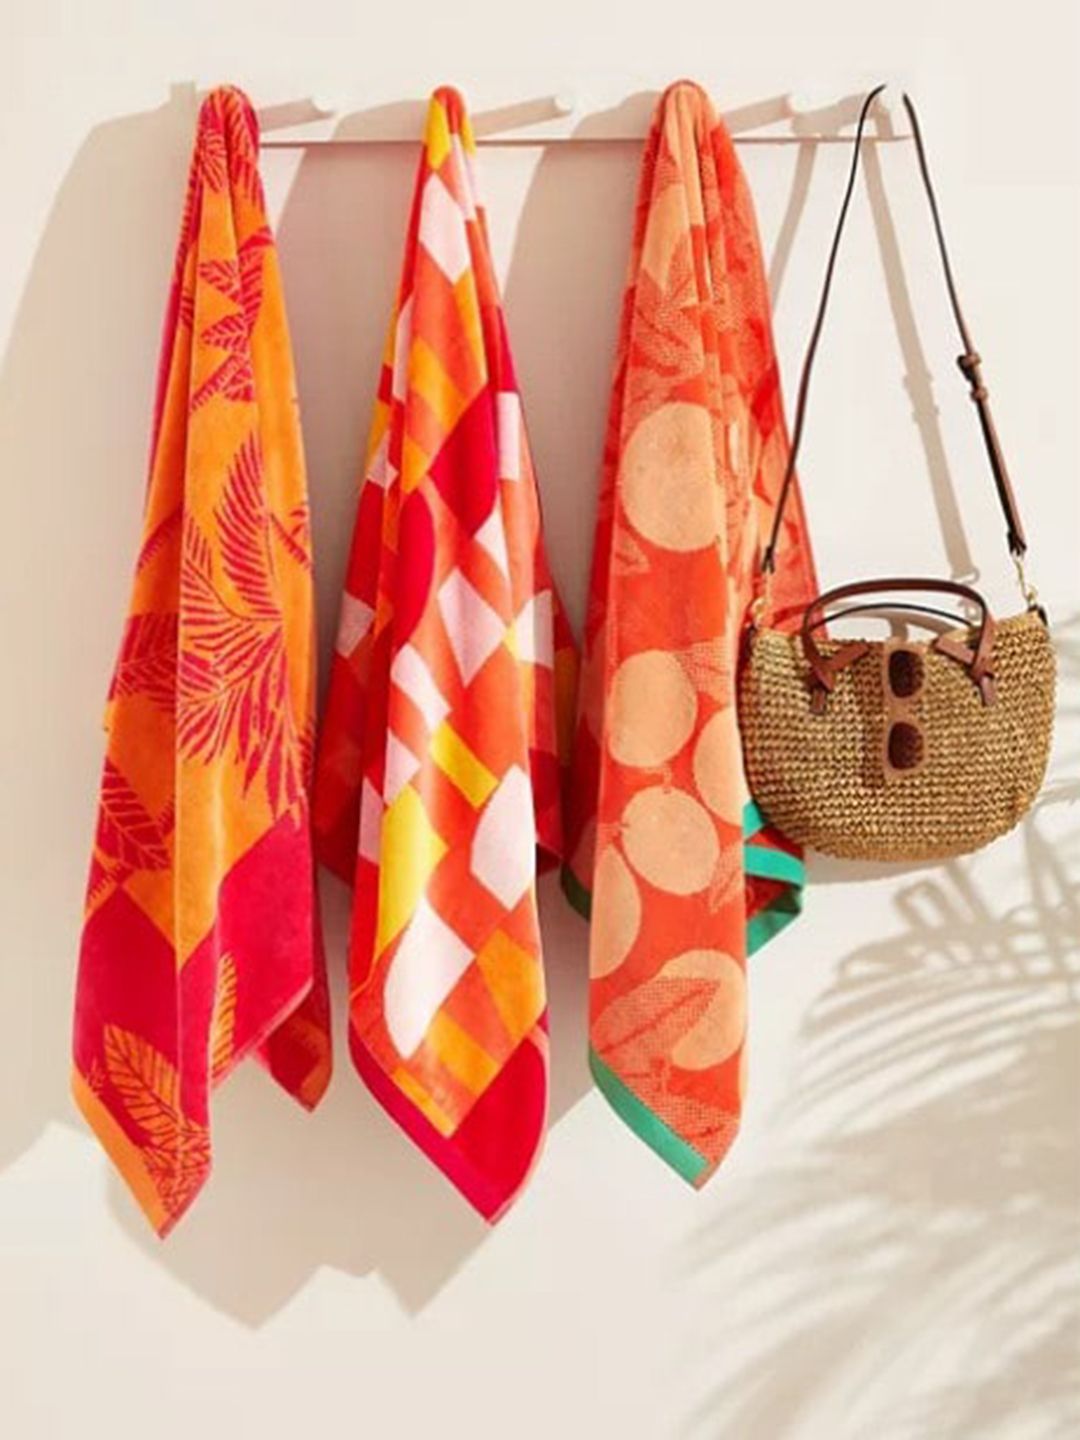 Marks & Spencer Pink & Orange Printed 600 GSM Cotton Bath Towels Price in India